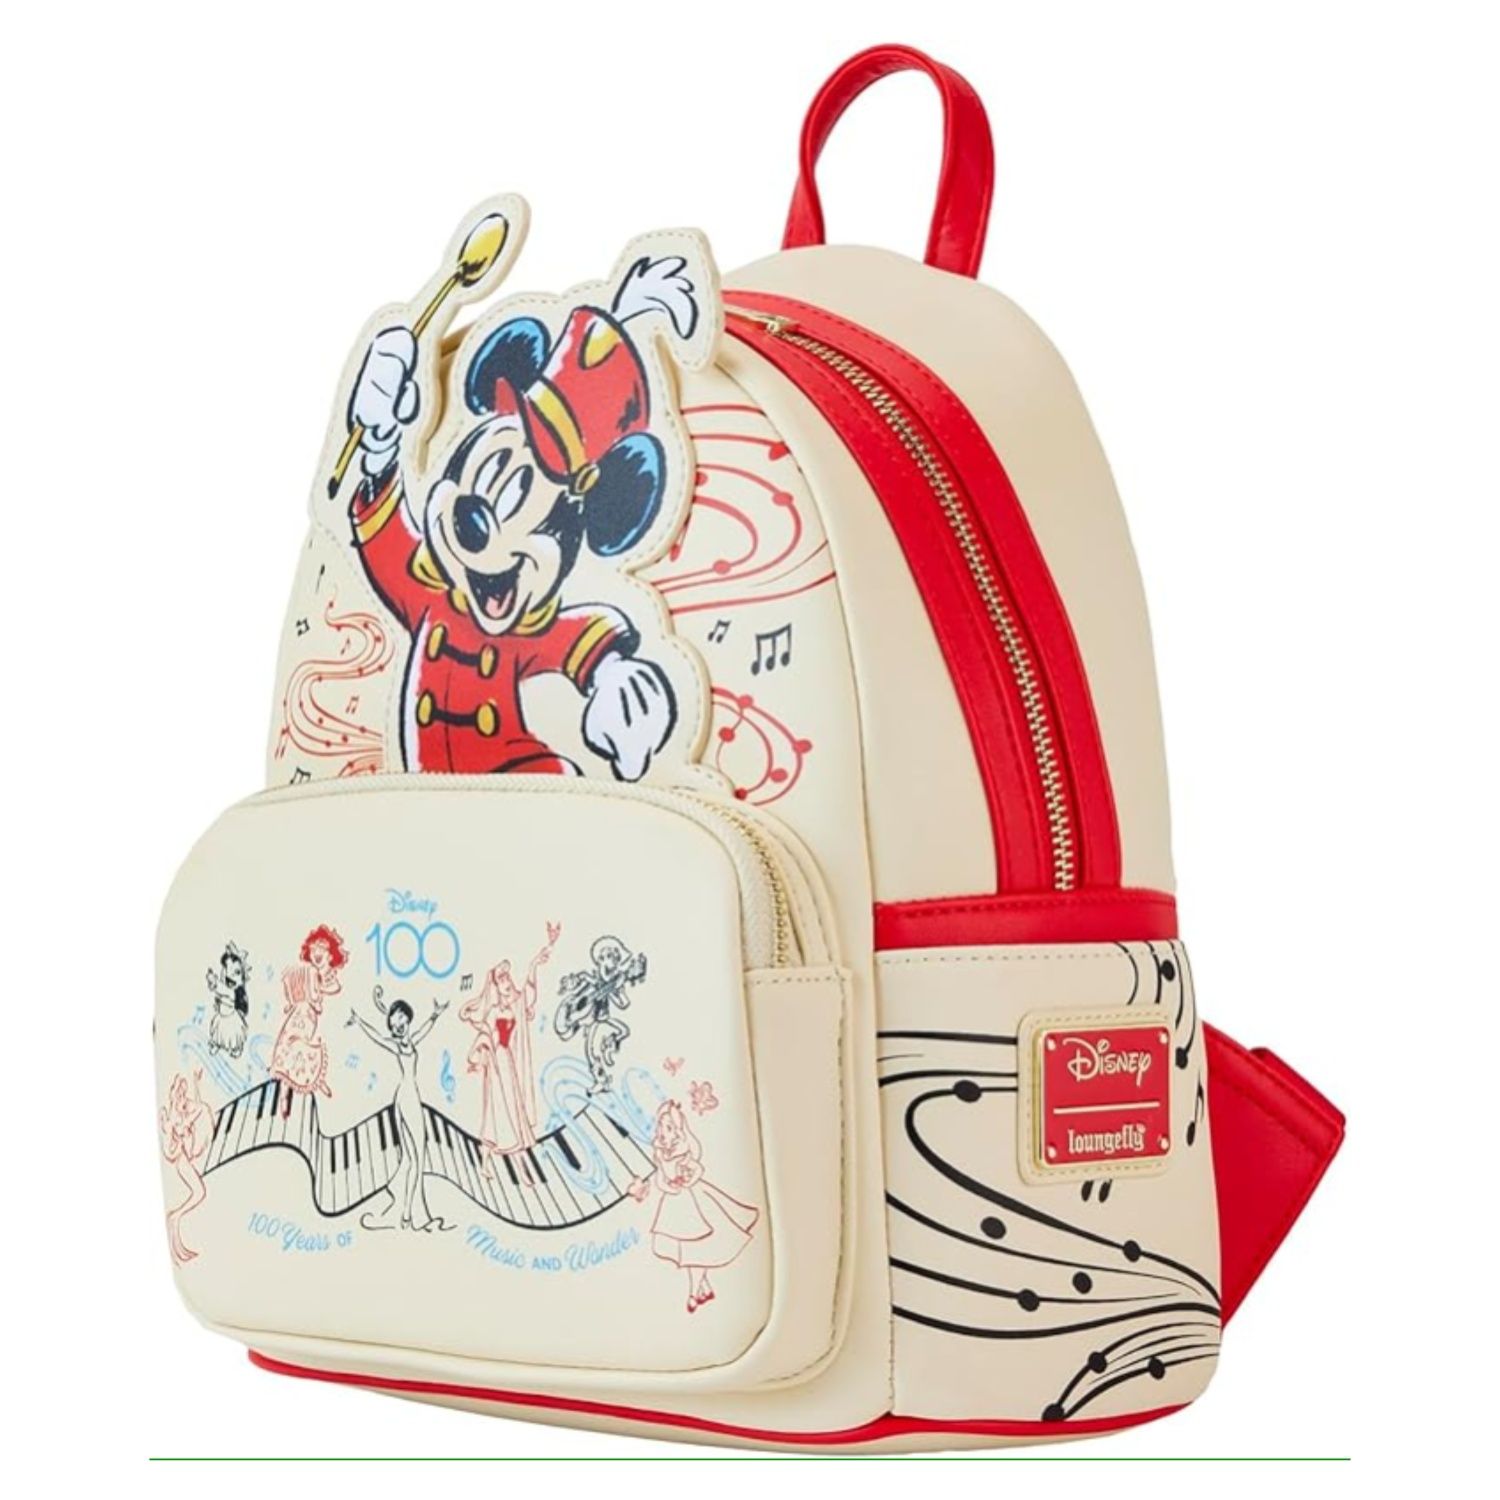 This cream backpack has Mickey on it in a band uniform and many musical characters below him.